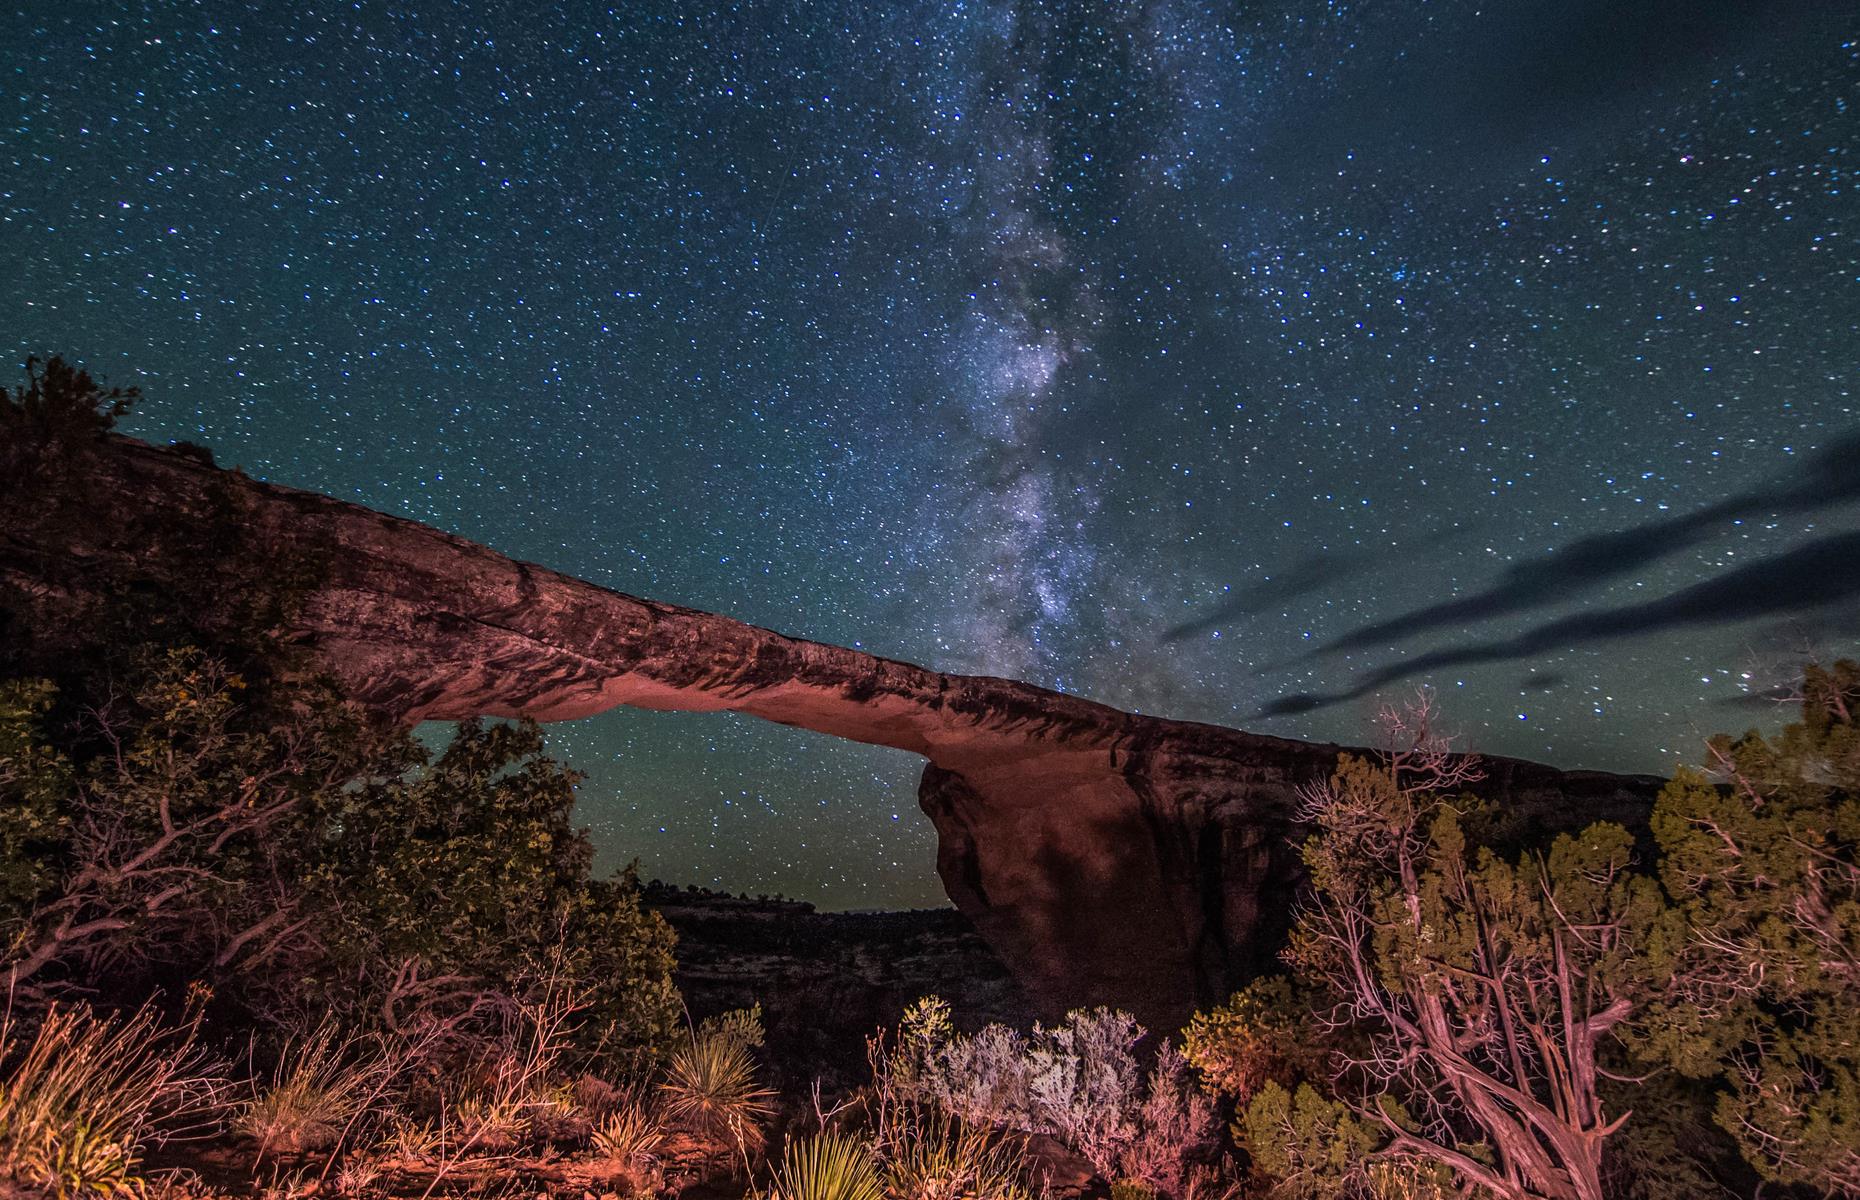 <p>The Natural Bridges National Monument – known for its wondrous arched rock formations like Owachomo Bridge (pictured) – became the world’s first International Dark Sky Park in 2007. Adventurous visitors are usually free to traverse Natural Bridges’ trails at any time of the day or night (<a href="https://www.nps.gov/nabr/index.htm">see the park website</a> for any updates). A night hike is the best way to drink in <a href="https://www.loveexploring.com/guides/87130/things-to-do-road-trip-south-utah">Southern Utah</a>'s starry skies, since the bridges aren't visible from any of the campgrounds here. </p>